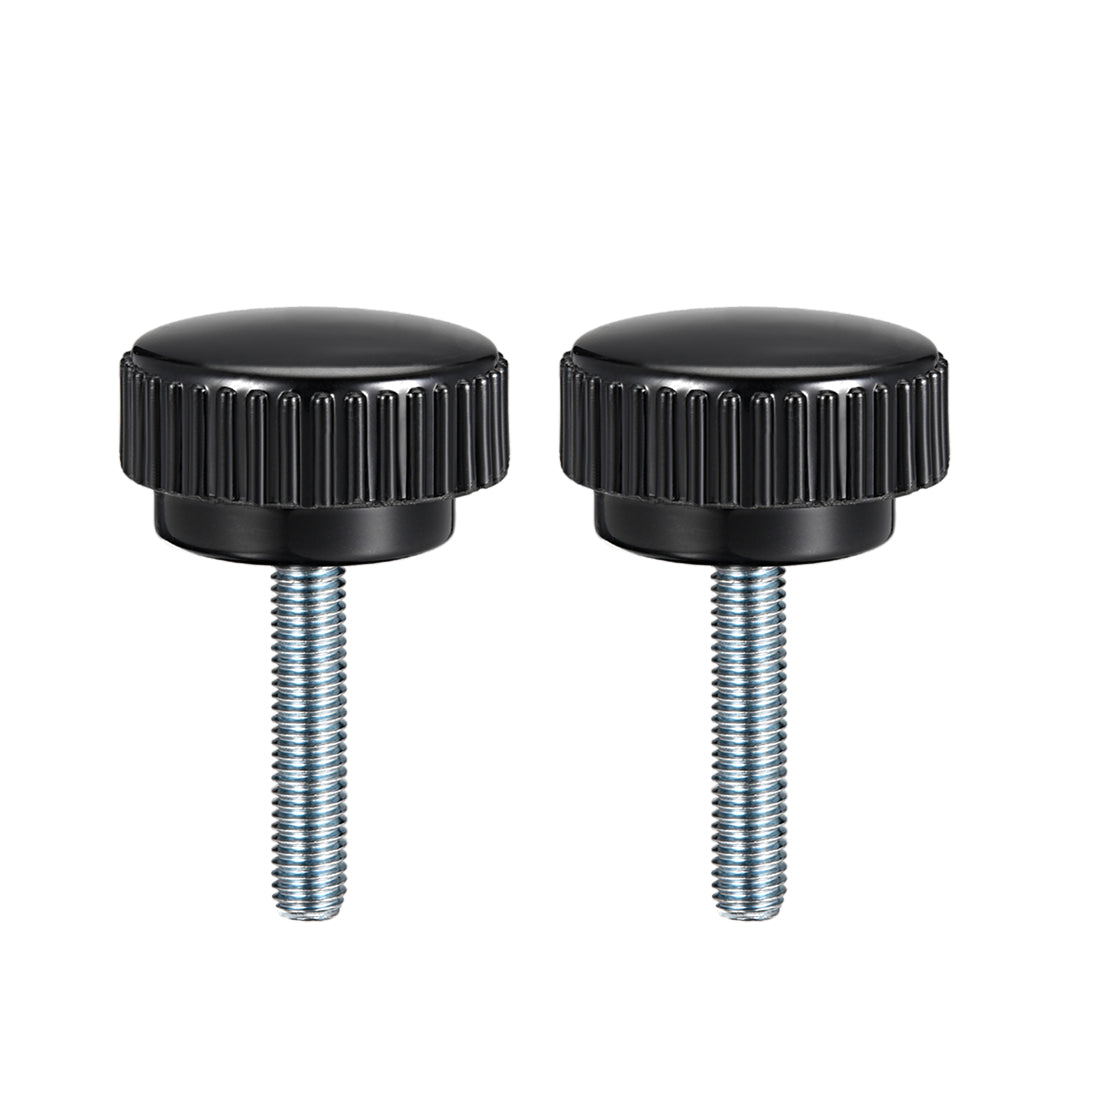 Uxcell Uxcell M5 x 15mm Male Thread Knurled Clamping Knobs Grip Thumb Screw on Type 2 Pcs